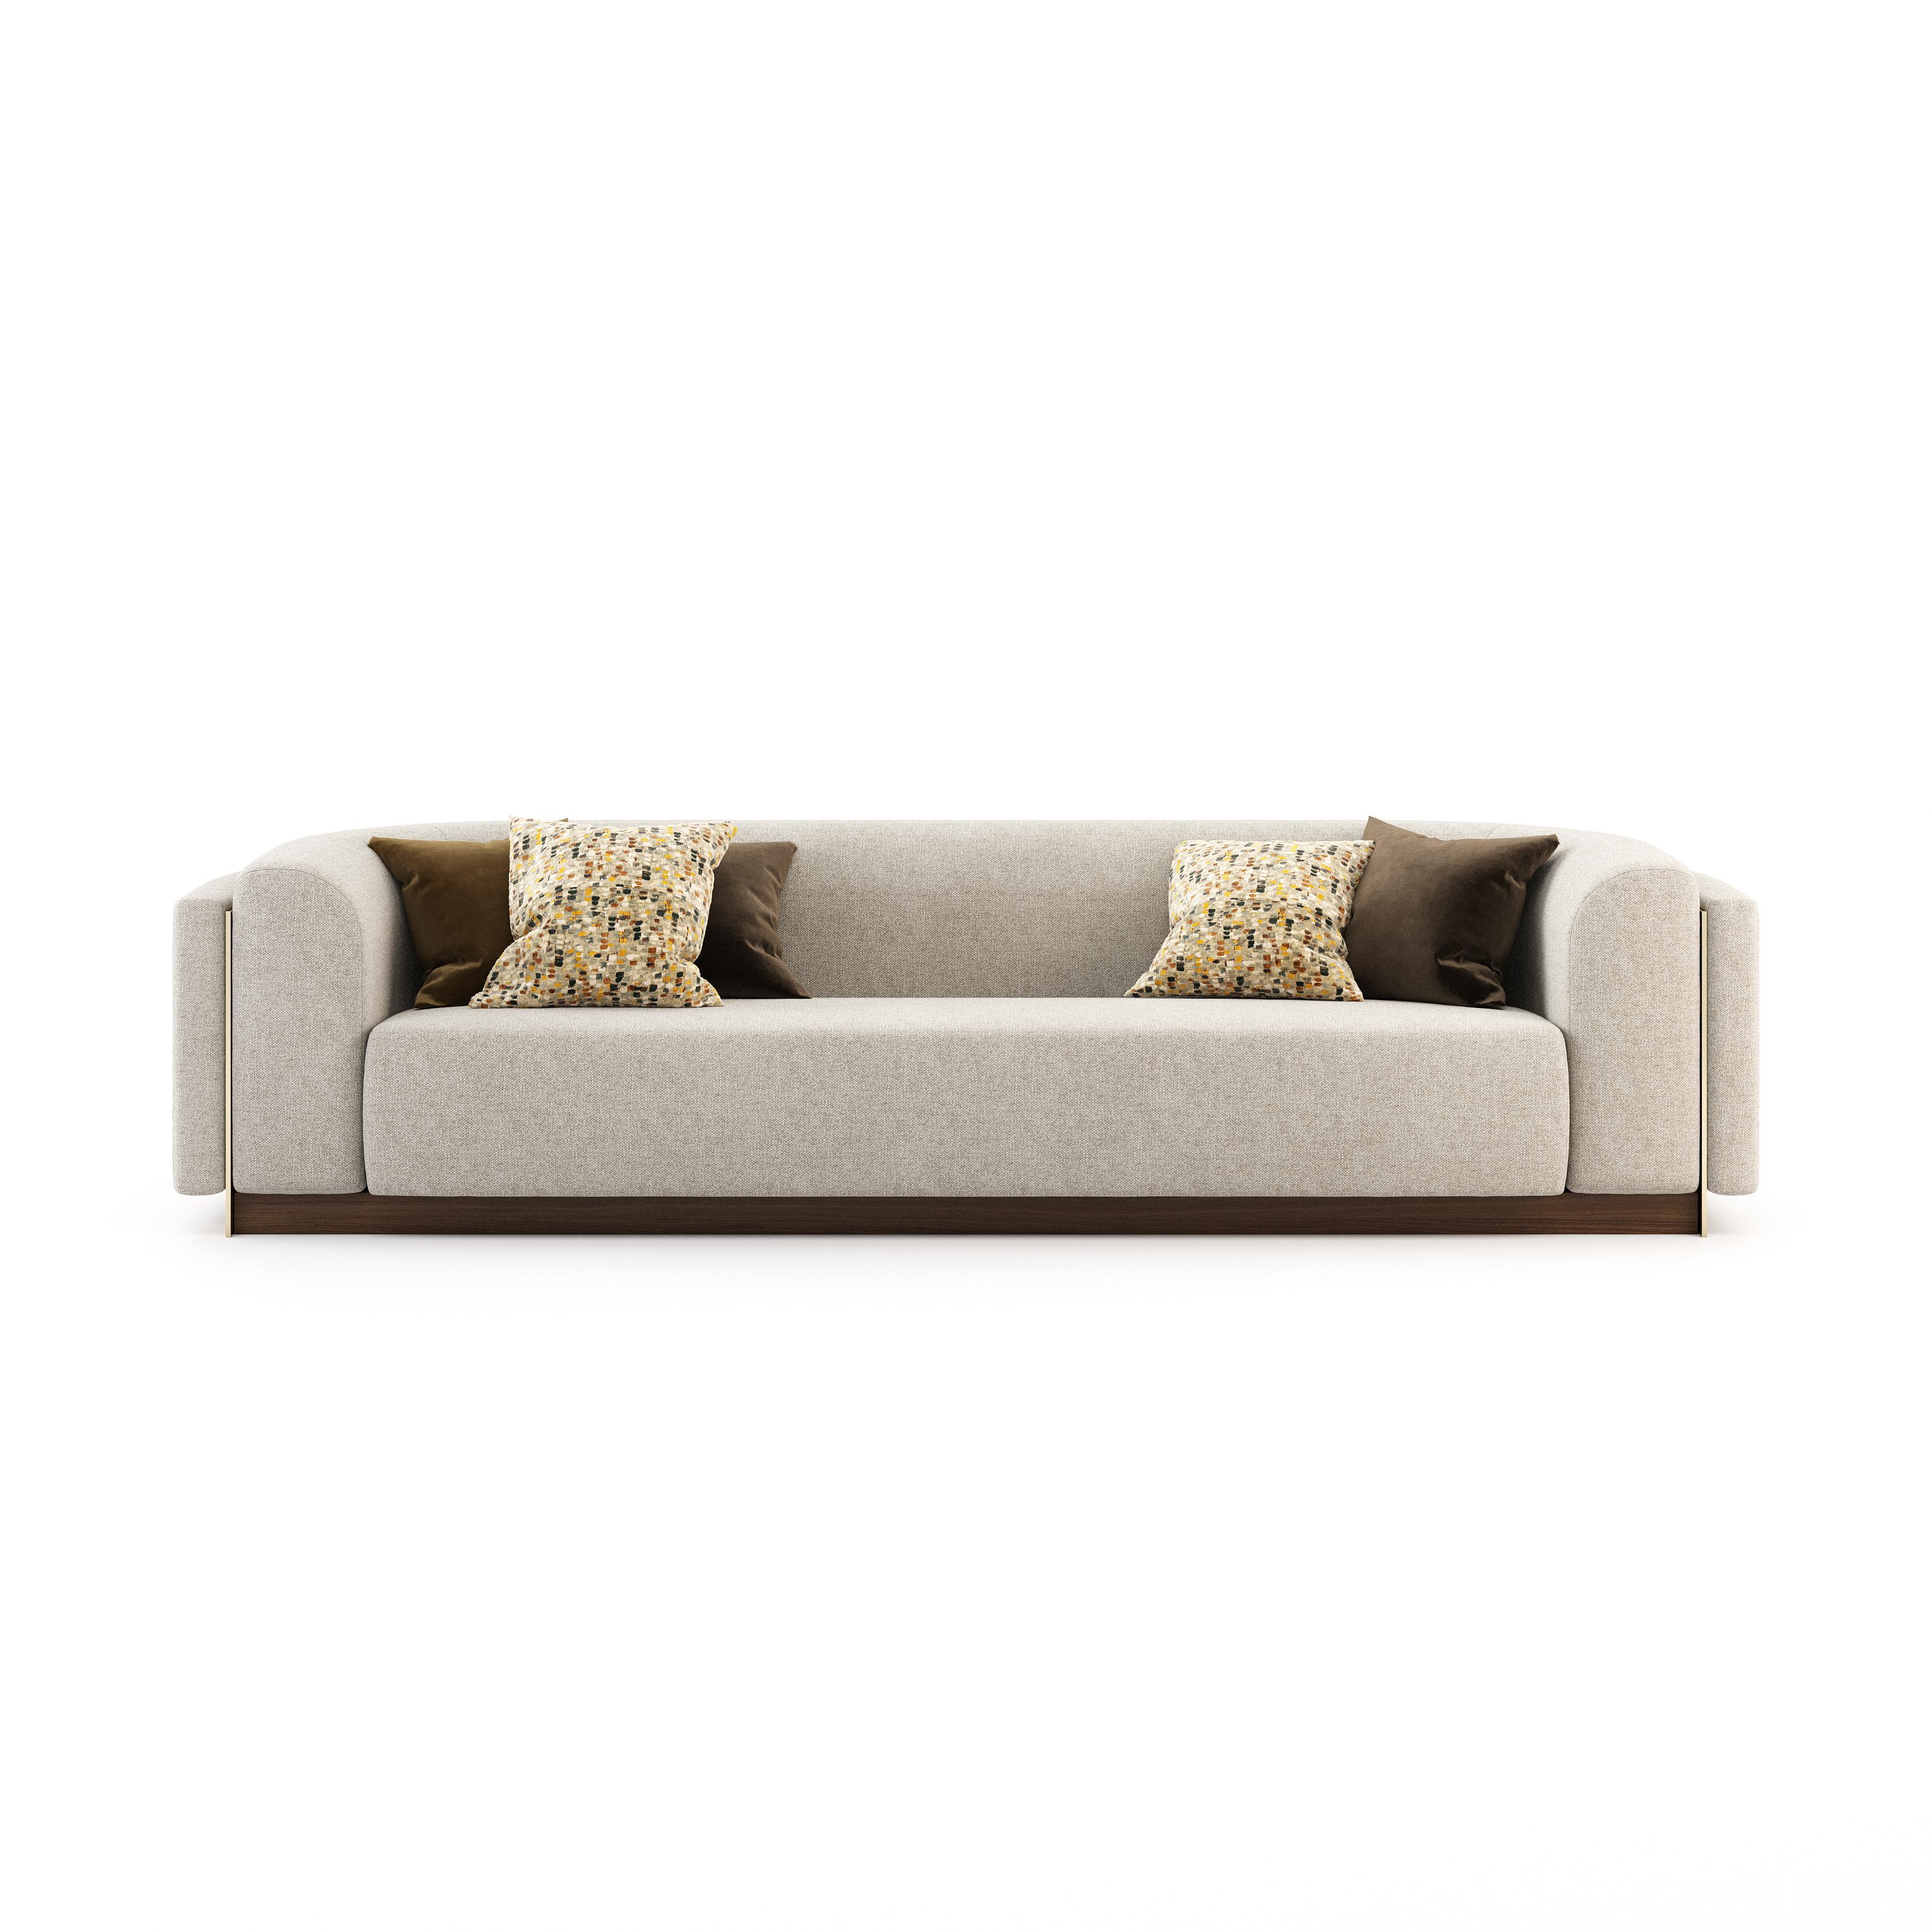 Wellington sofa by Laskasas is one of those sofas that you didn’t know you need it until you have it. This contemporary sofa with a vintage touch will embellish your living room and other open settings. With a wooden base, it presents a convex back